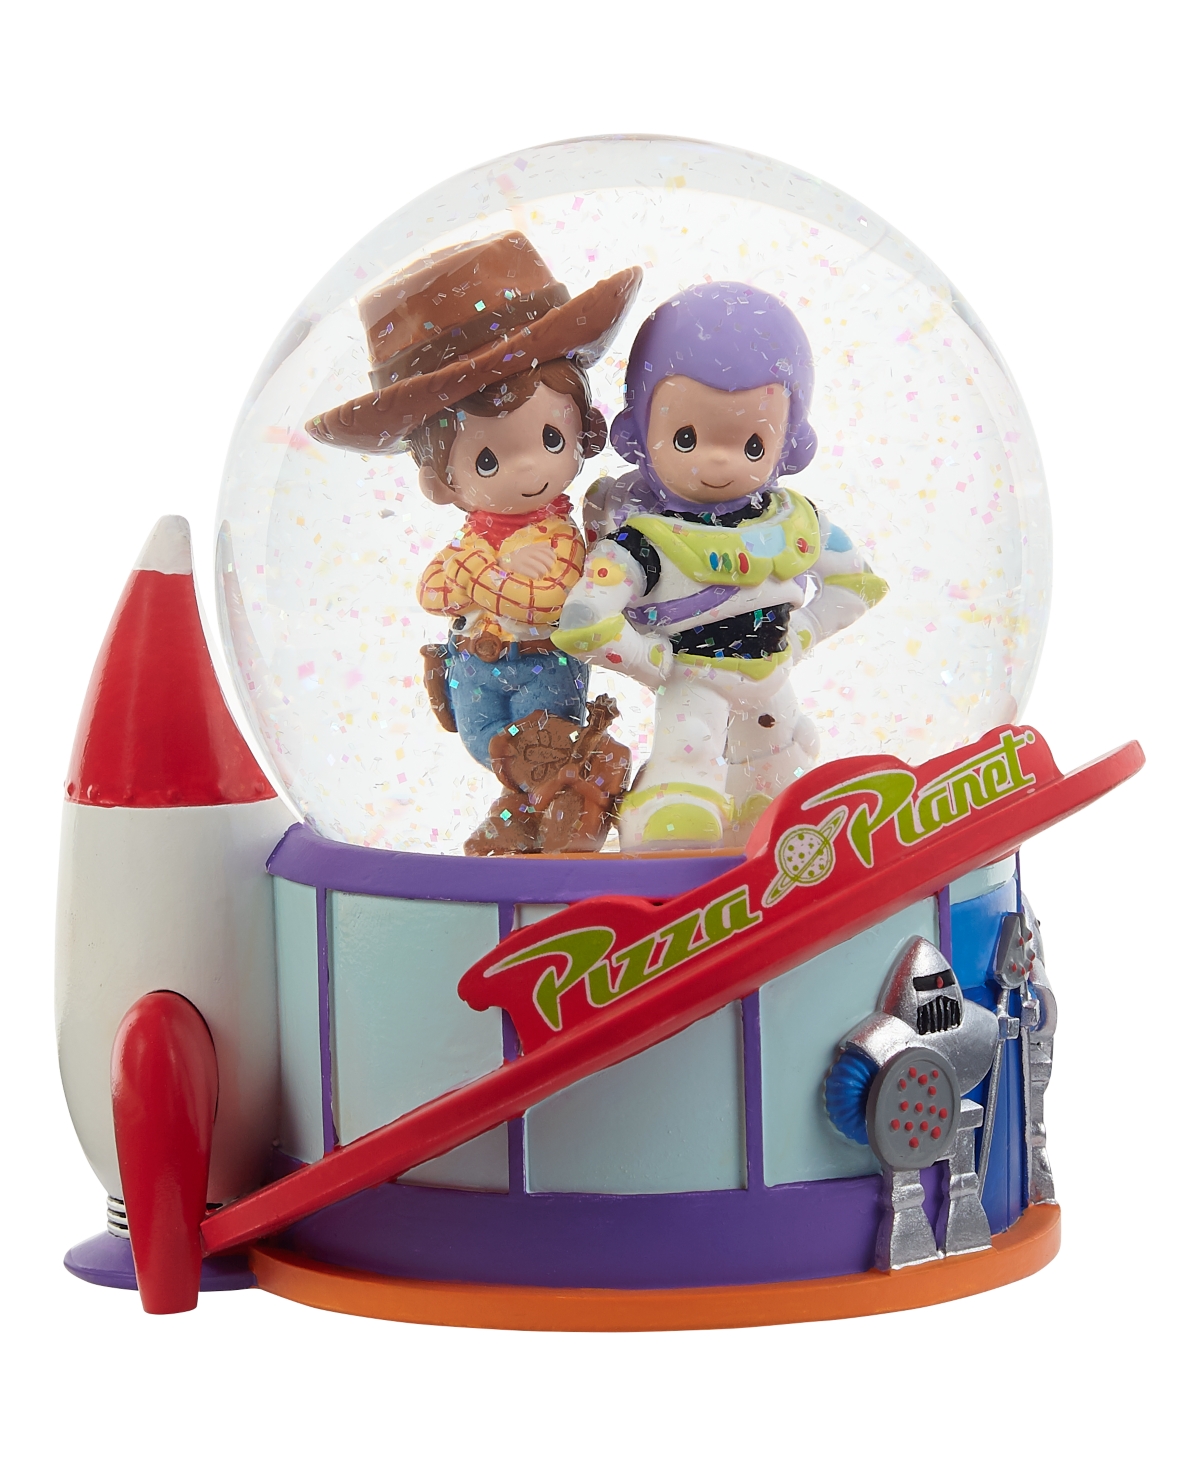 213107 You've Got a Friend in Me Musical Resin, Glass Snow Globe - Multicolor